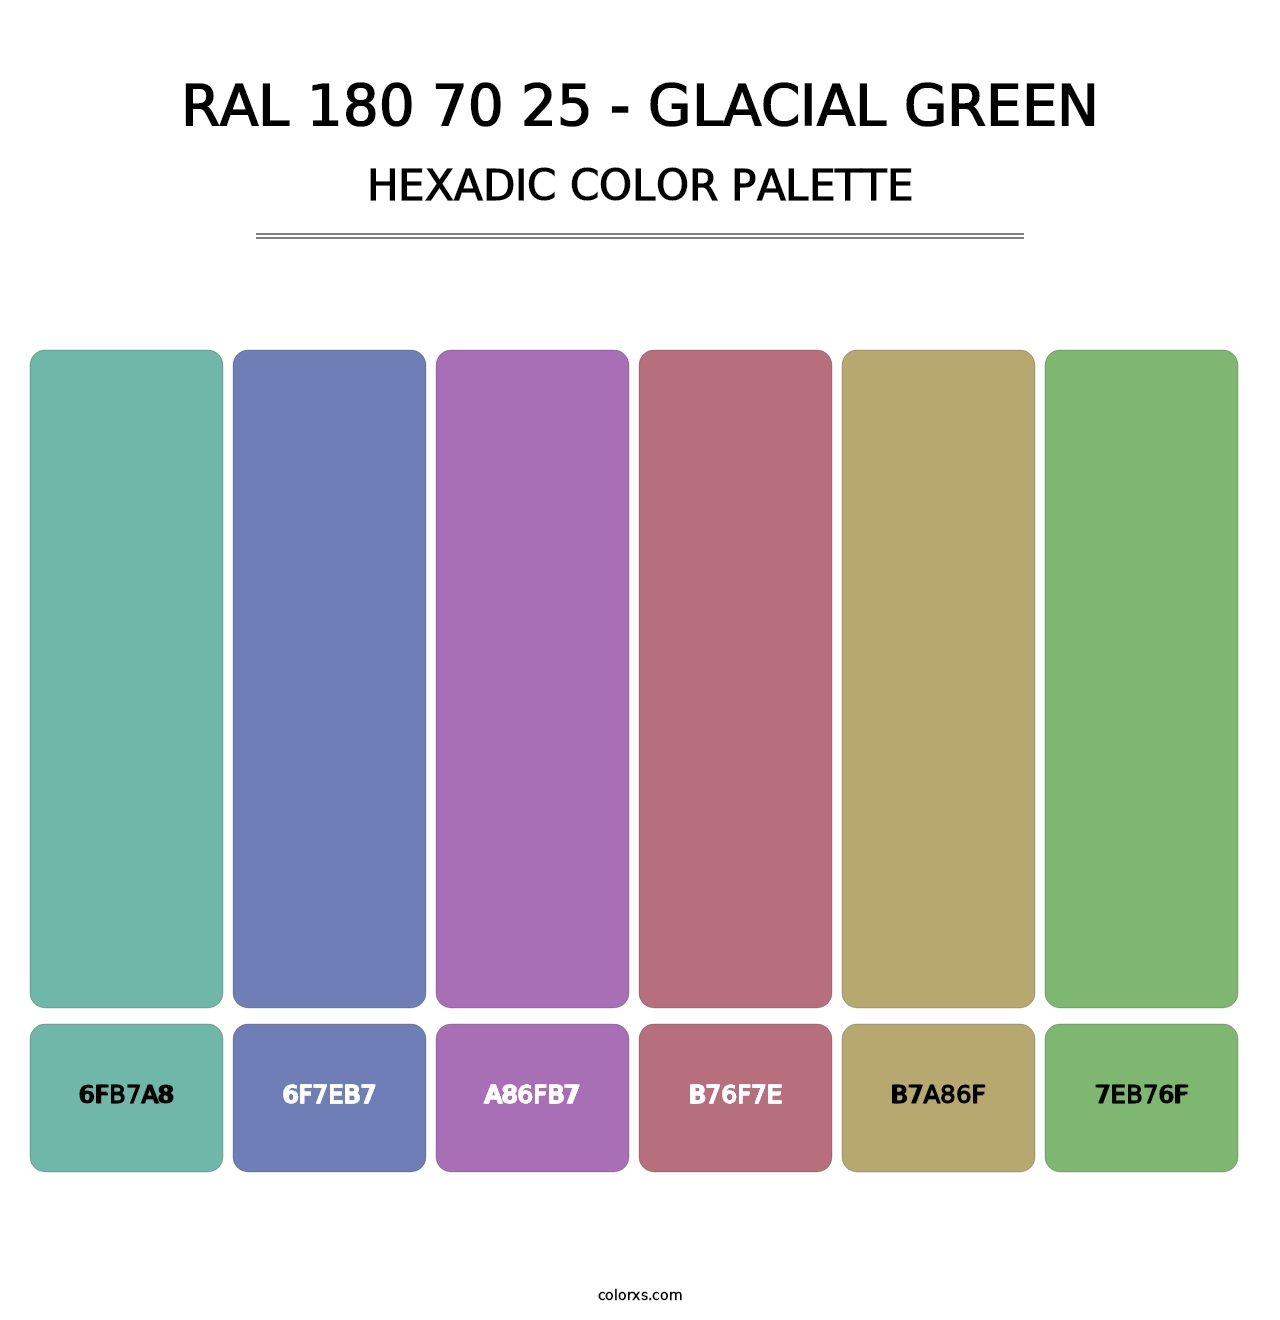 RAL 180 70 25 - Glacial Green - Hexadic Color Palette